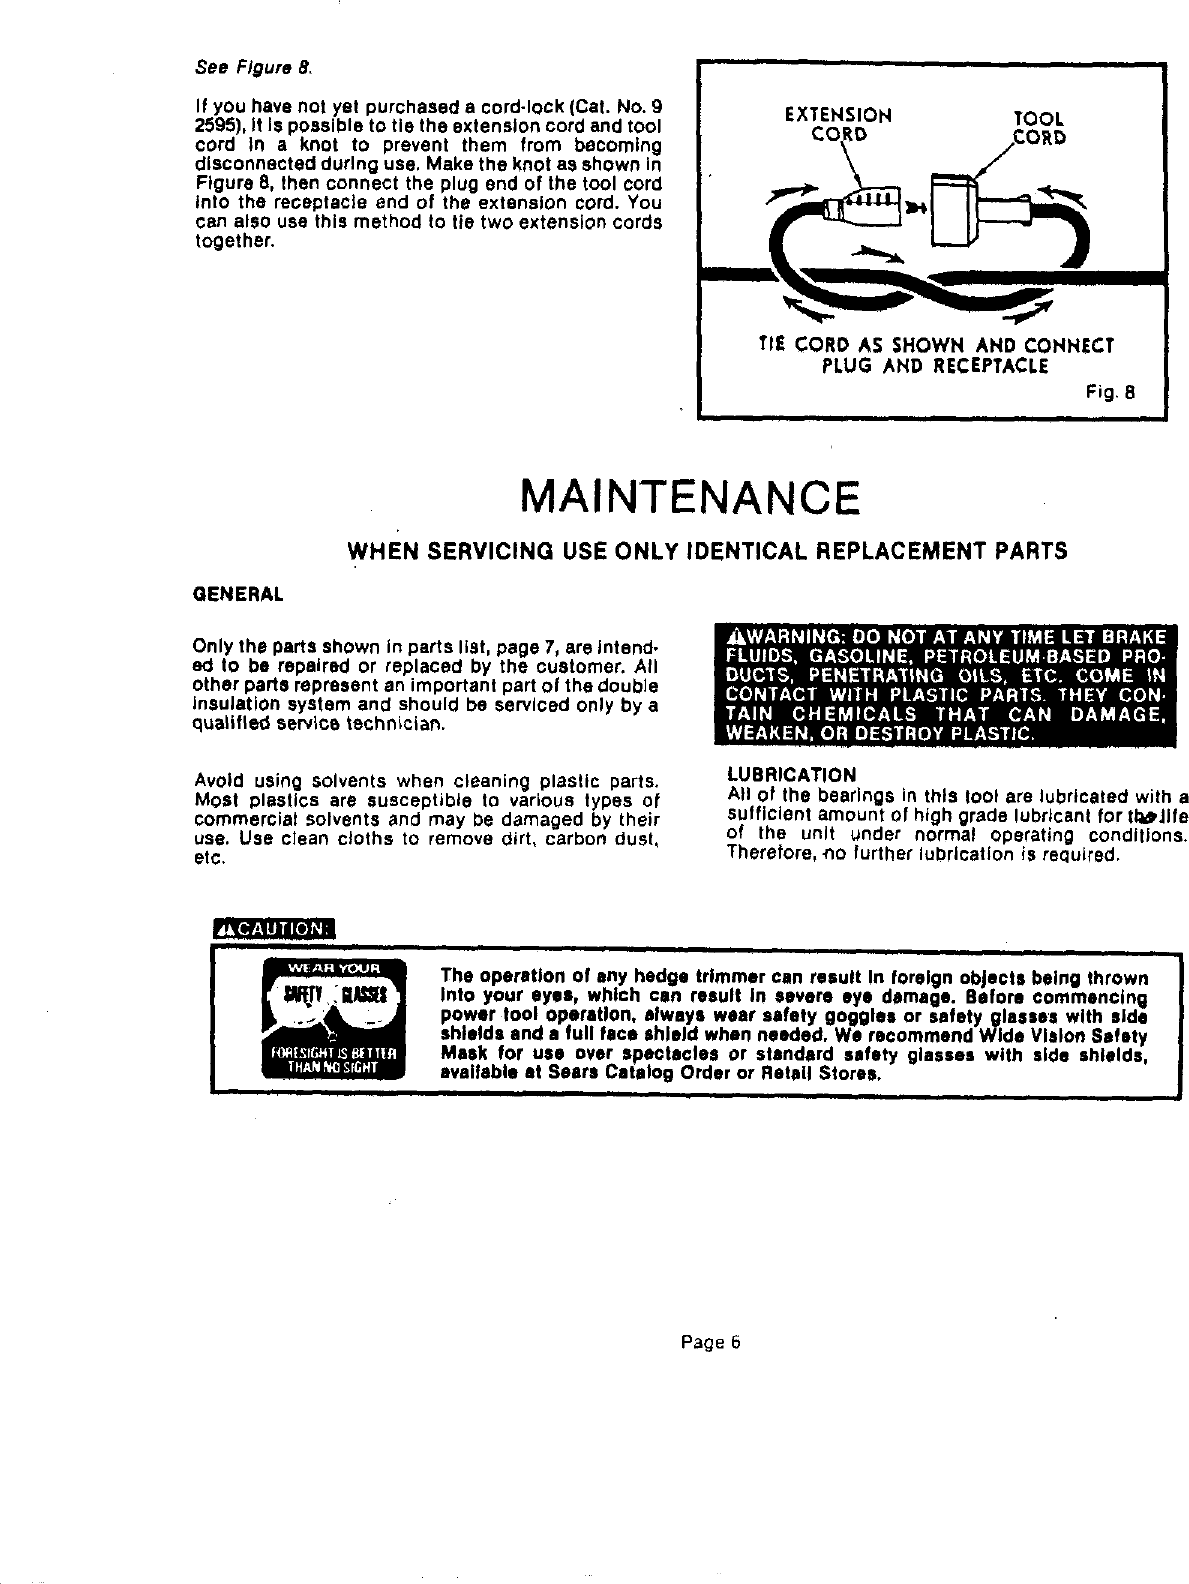 Page 6 of 8 - Craftsman 315796621 User Manual  HEDGE TRIMMER - Manuals And Guides L0605452